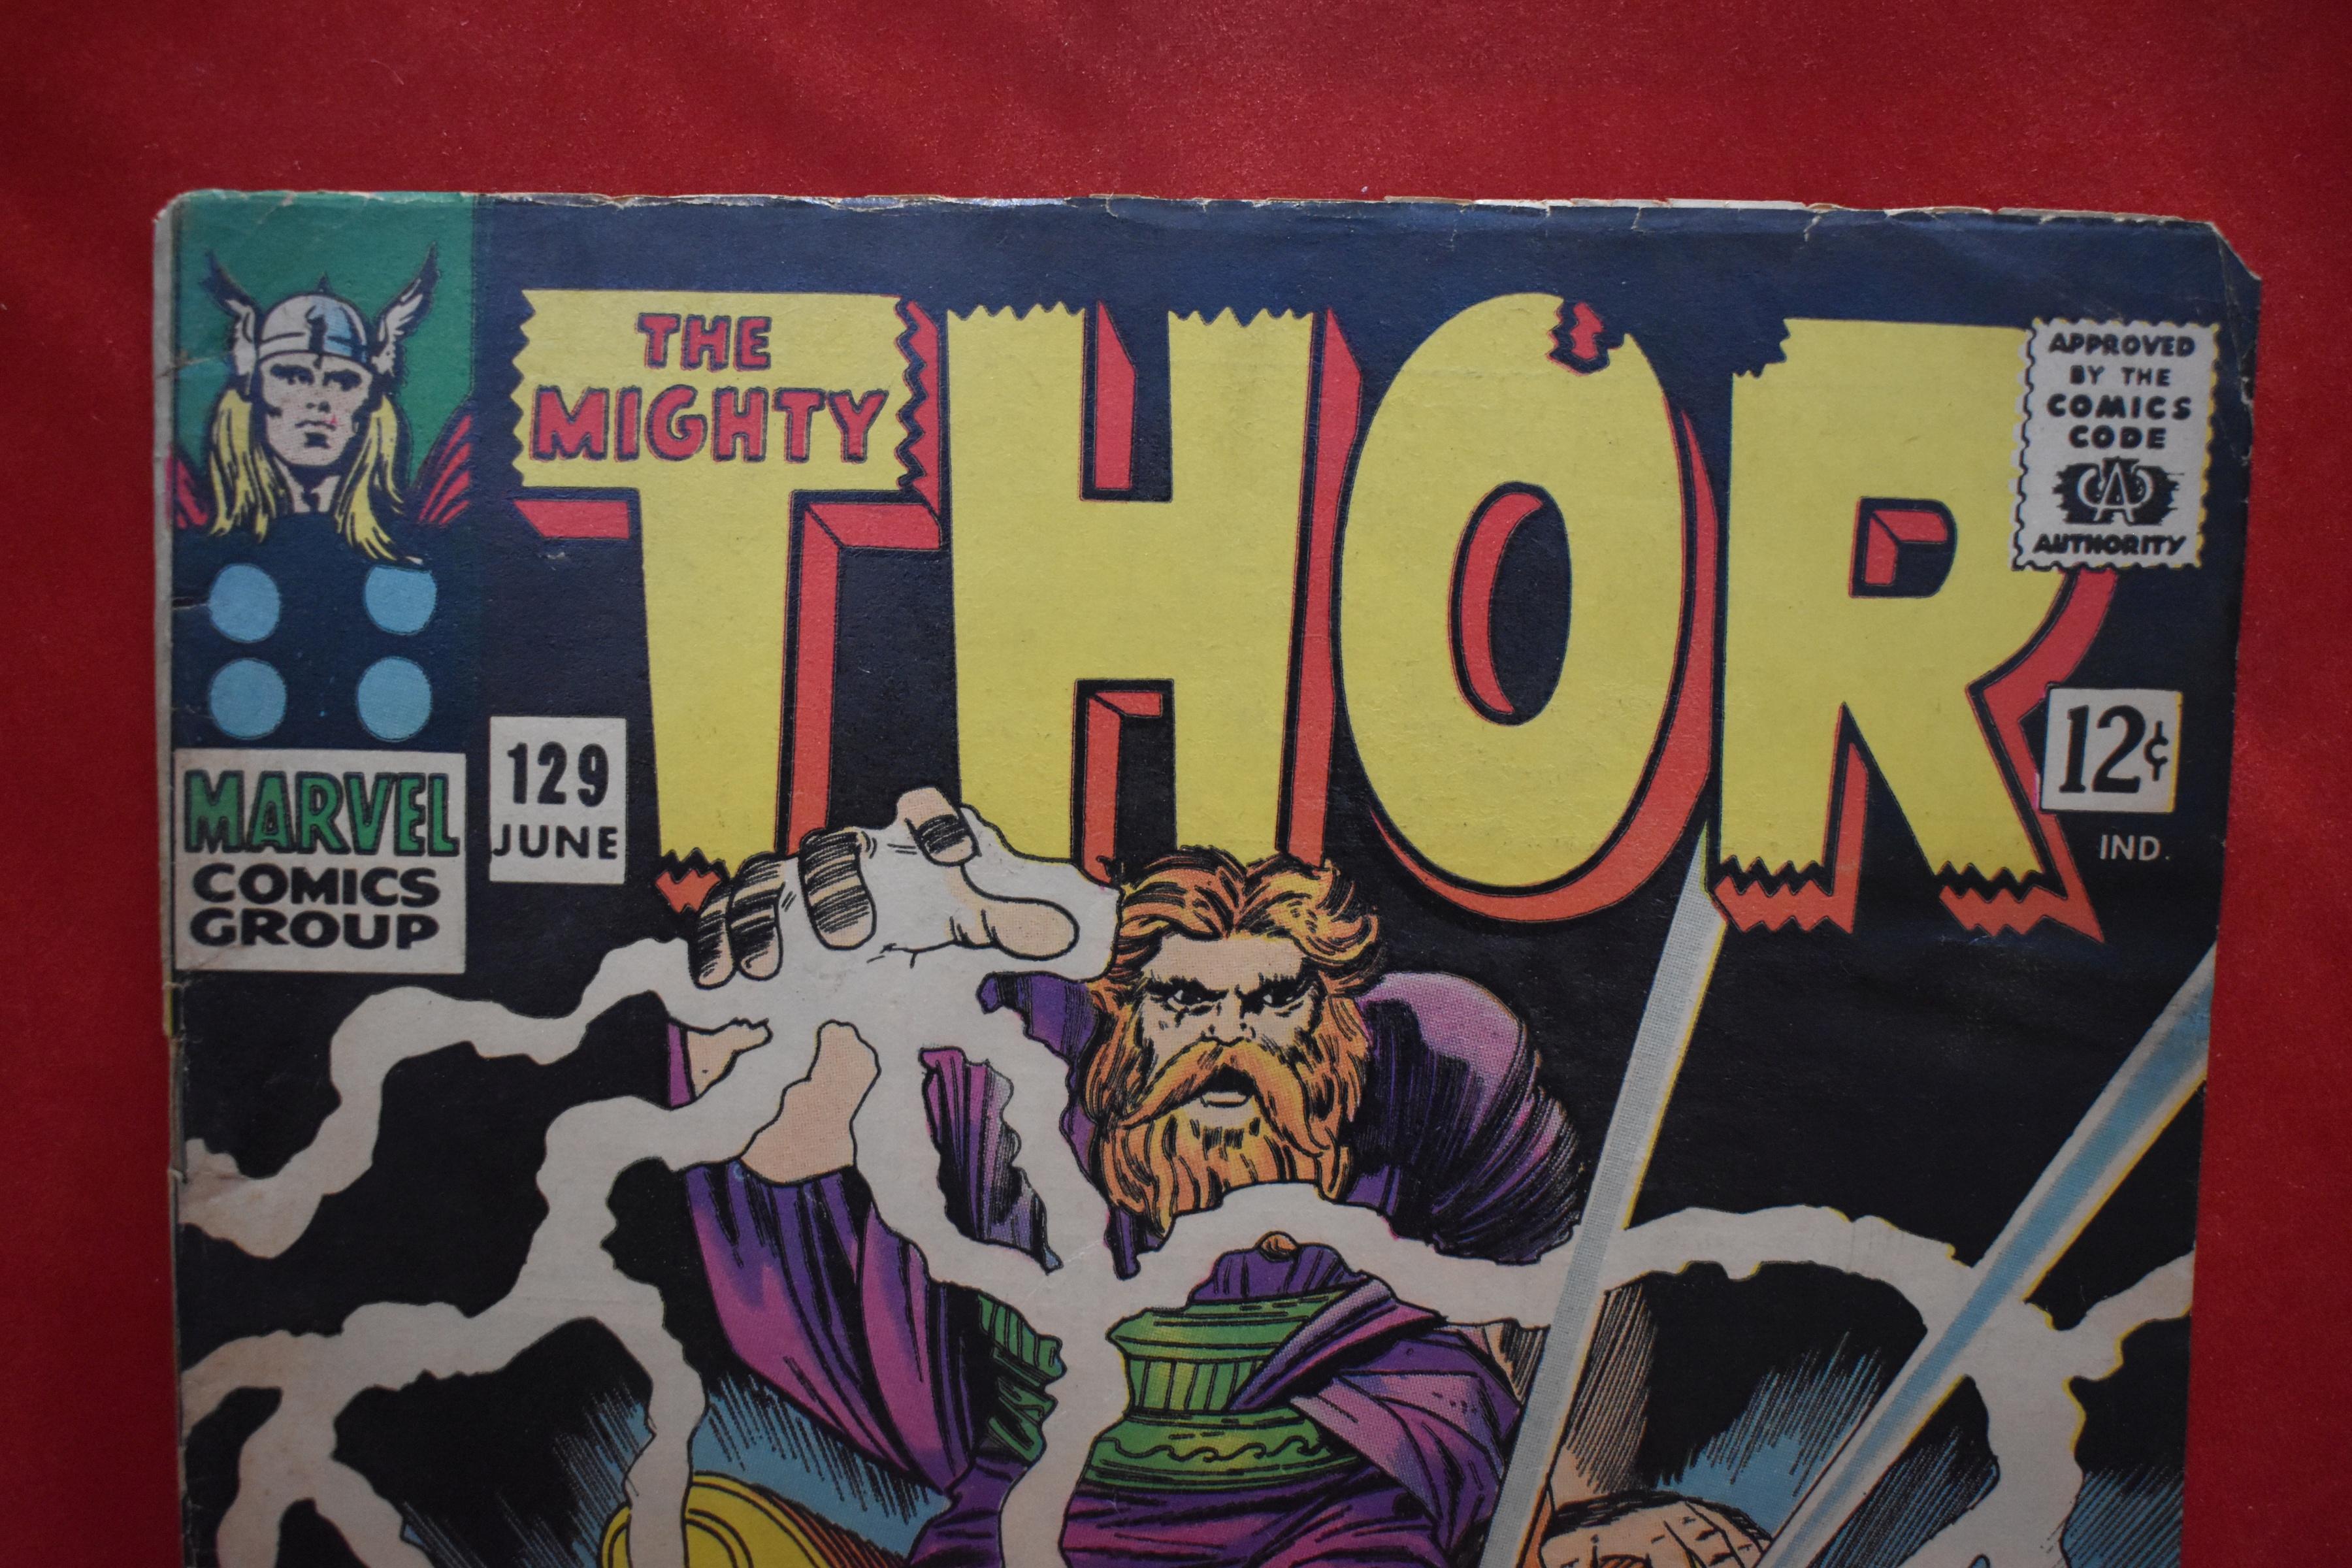 THOR #129 | KEY 1ST ARES, 1ST HERA, 1ST HERMES, 1ST DYONYSIUS | KIRBY AND LEE - 1966